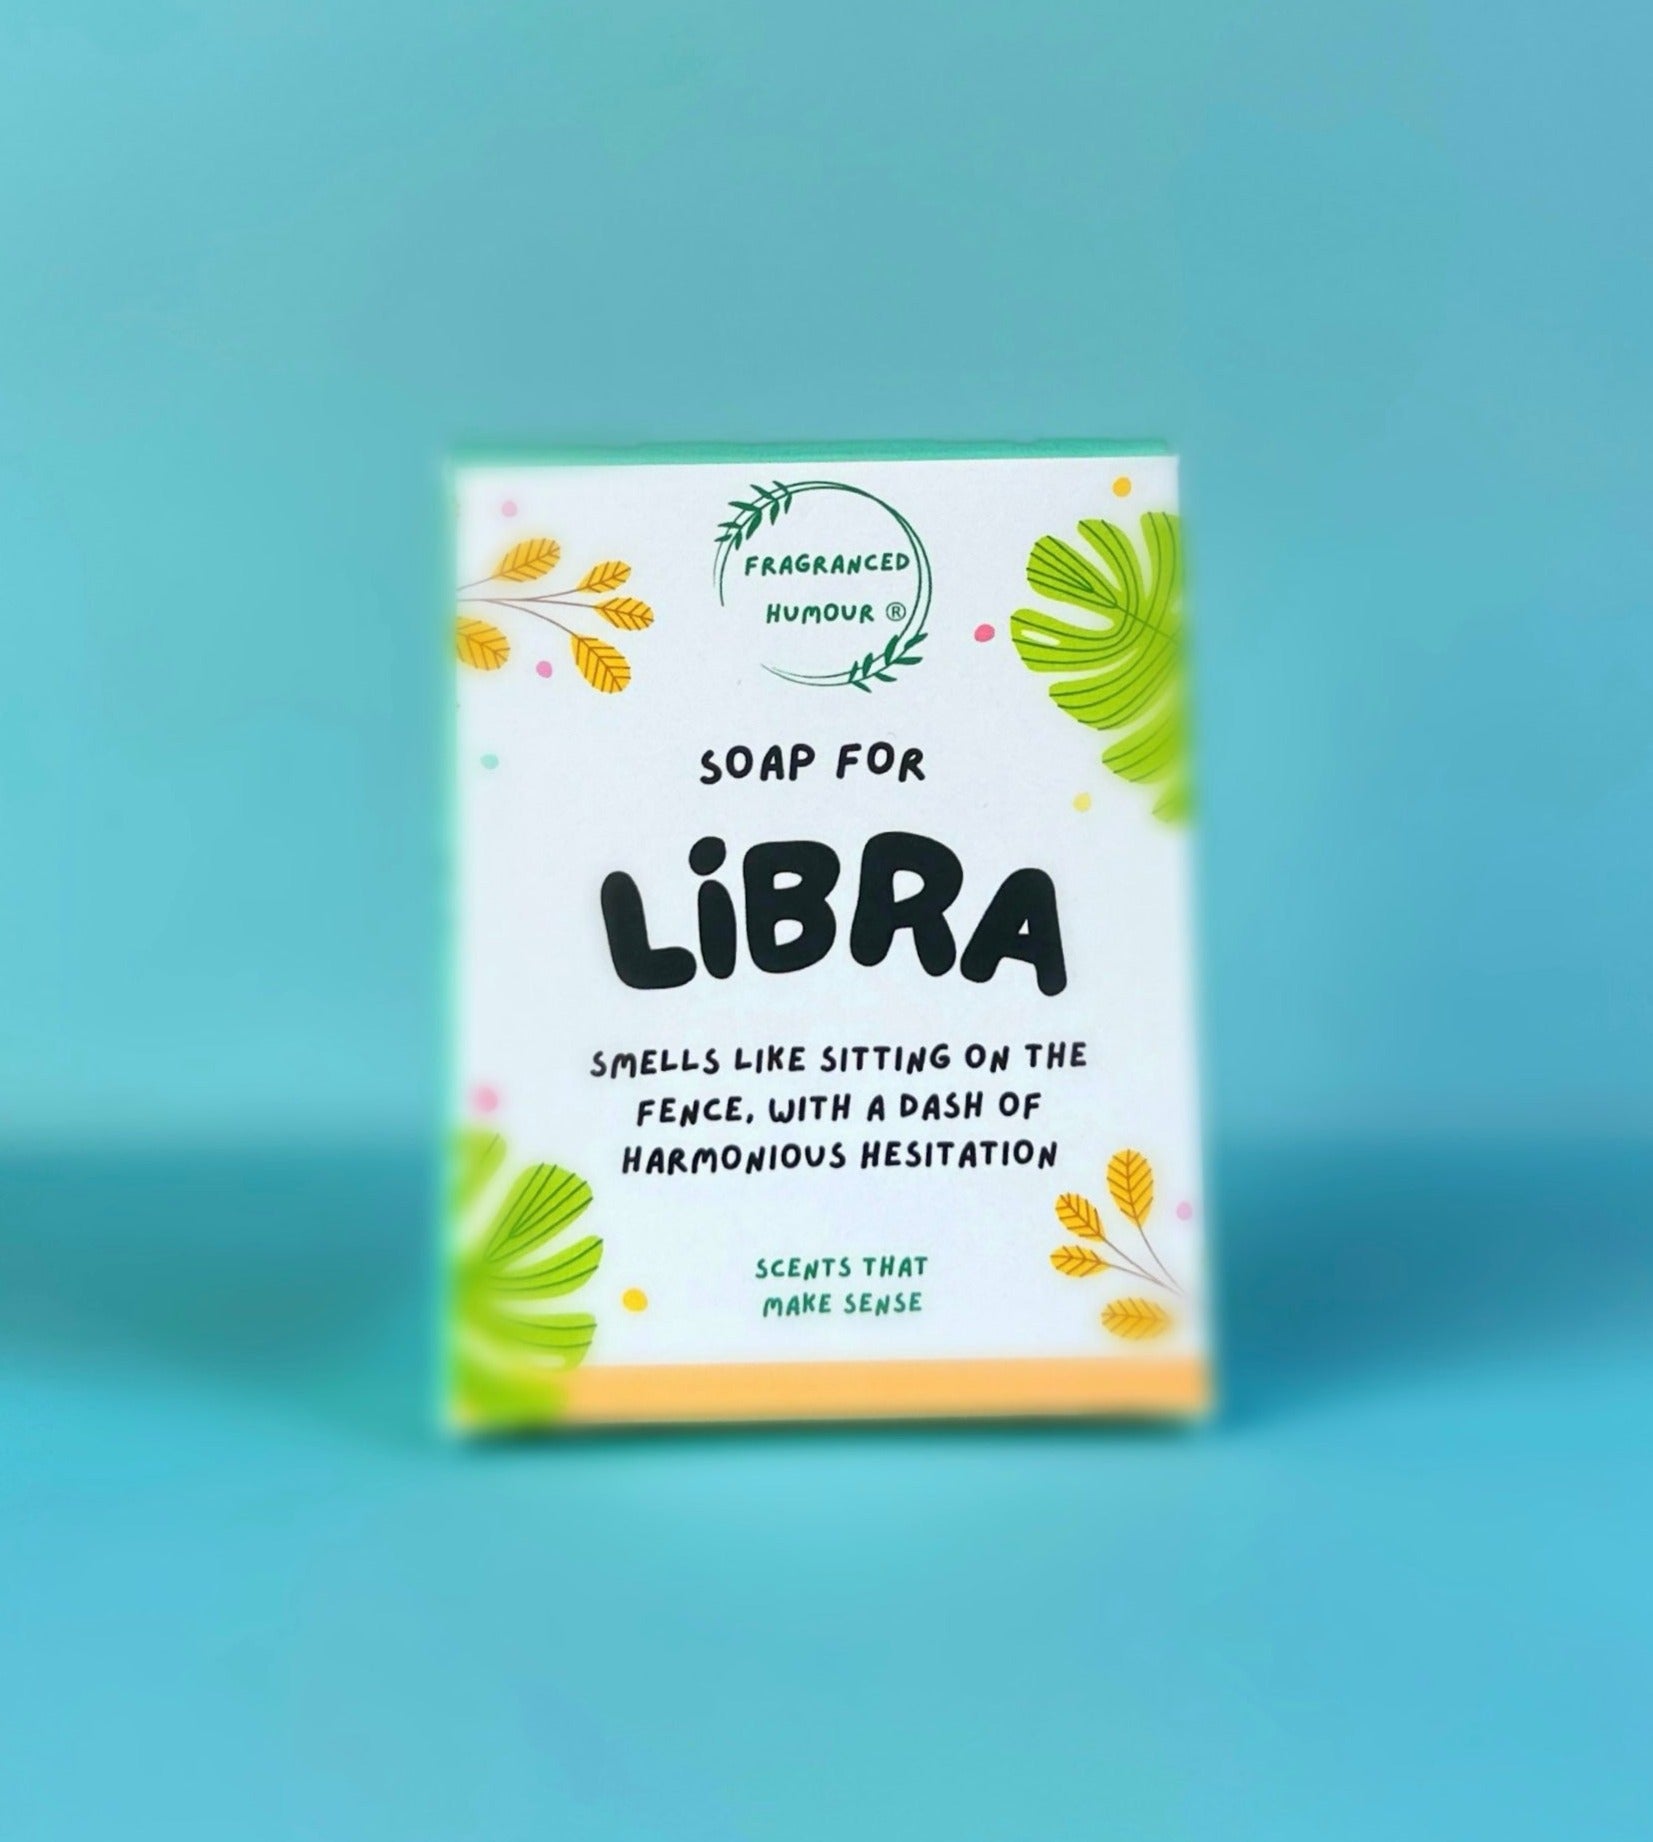 unusual birthday gift for libra funny soap the text on the box reads libra smells like sitting on the fence with a dash of harmonius hesitation